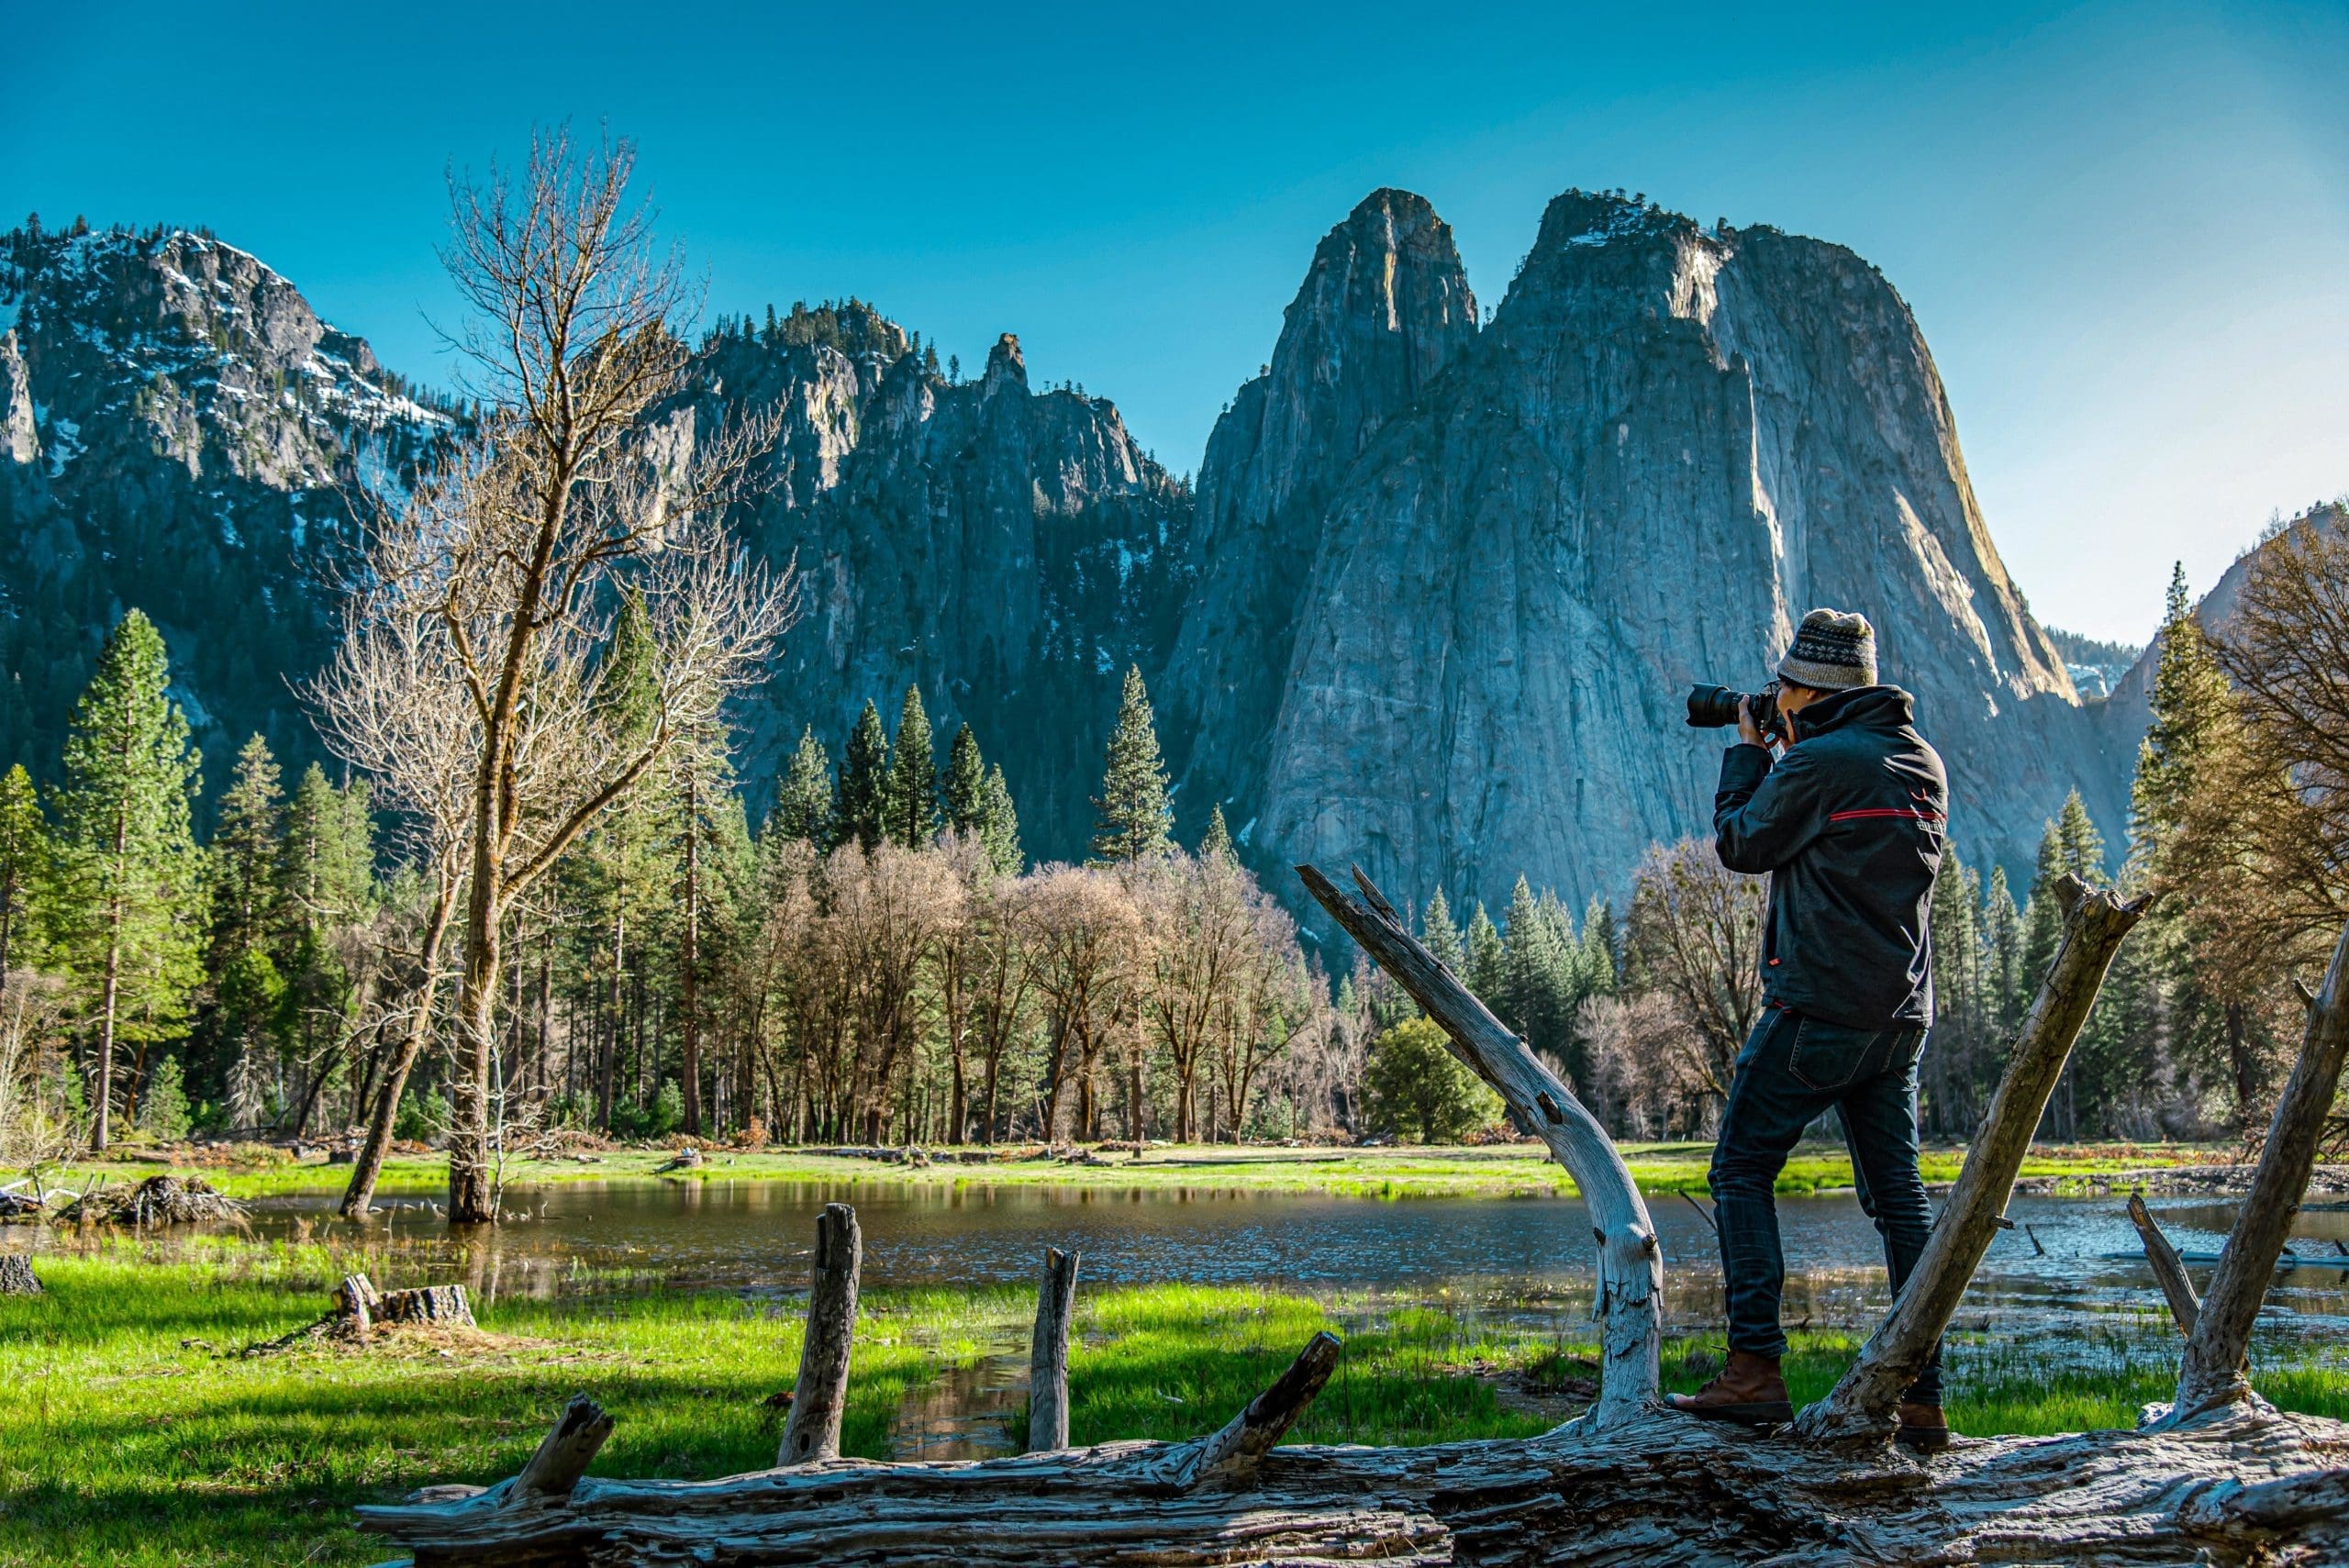 Book an Unforgettable Adventure with REI in Yosemite National Park